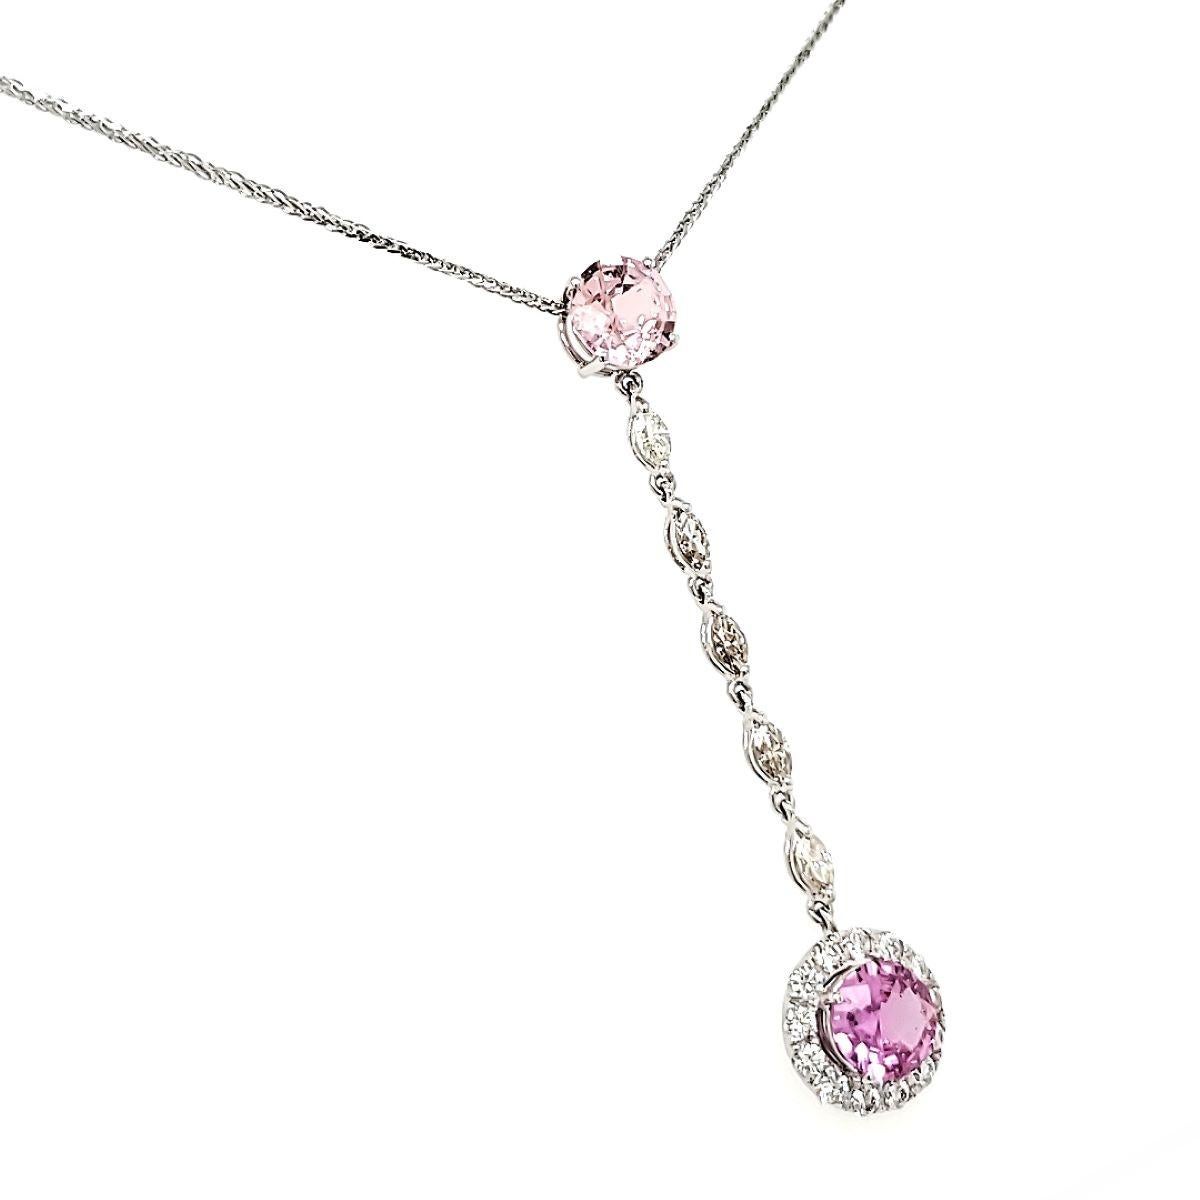 Charm and captivate with every sway.

This beautiful piece features two diamond-cut pink sapphires totaling 2.44 cts.

Adorning the delicate drop are five marquise diamonds, totaling 0.42 carats, arranged in a vertical cascade, effortlessly